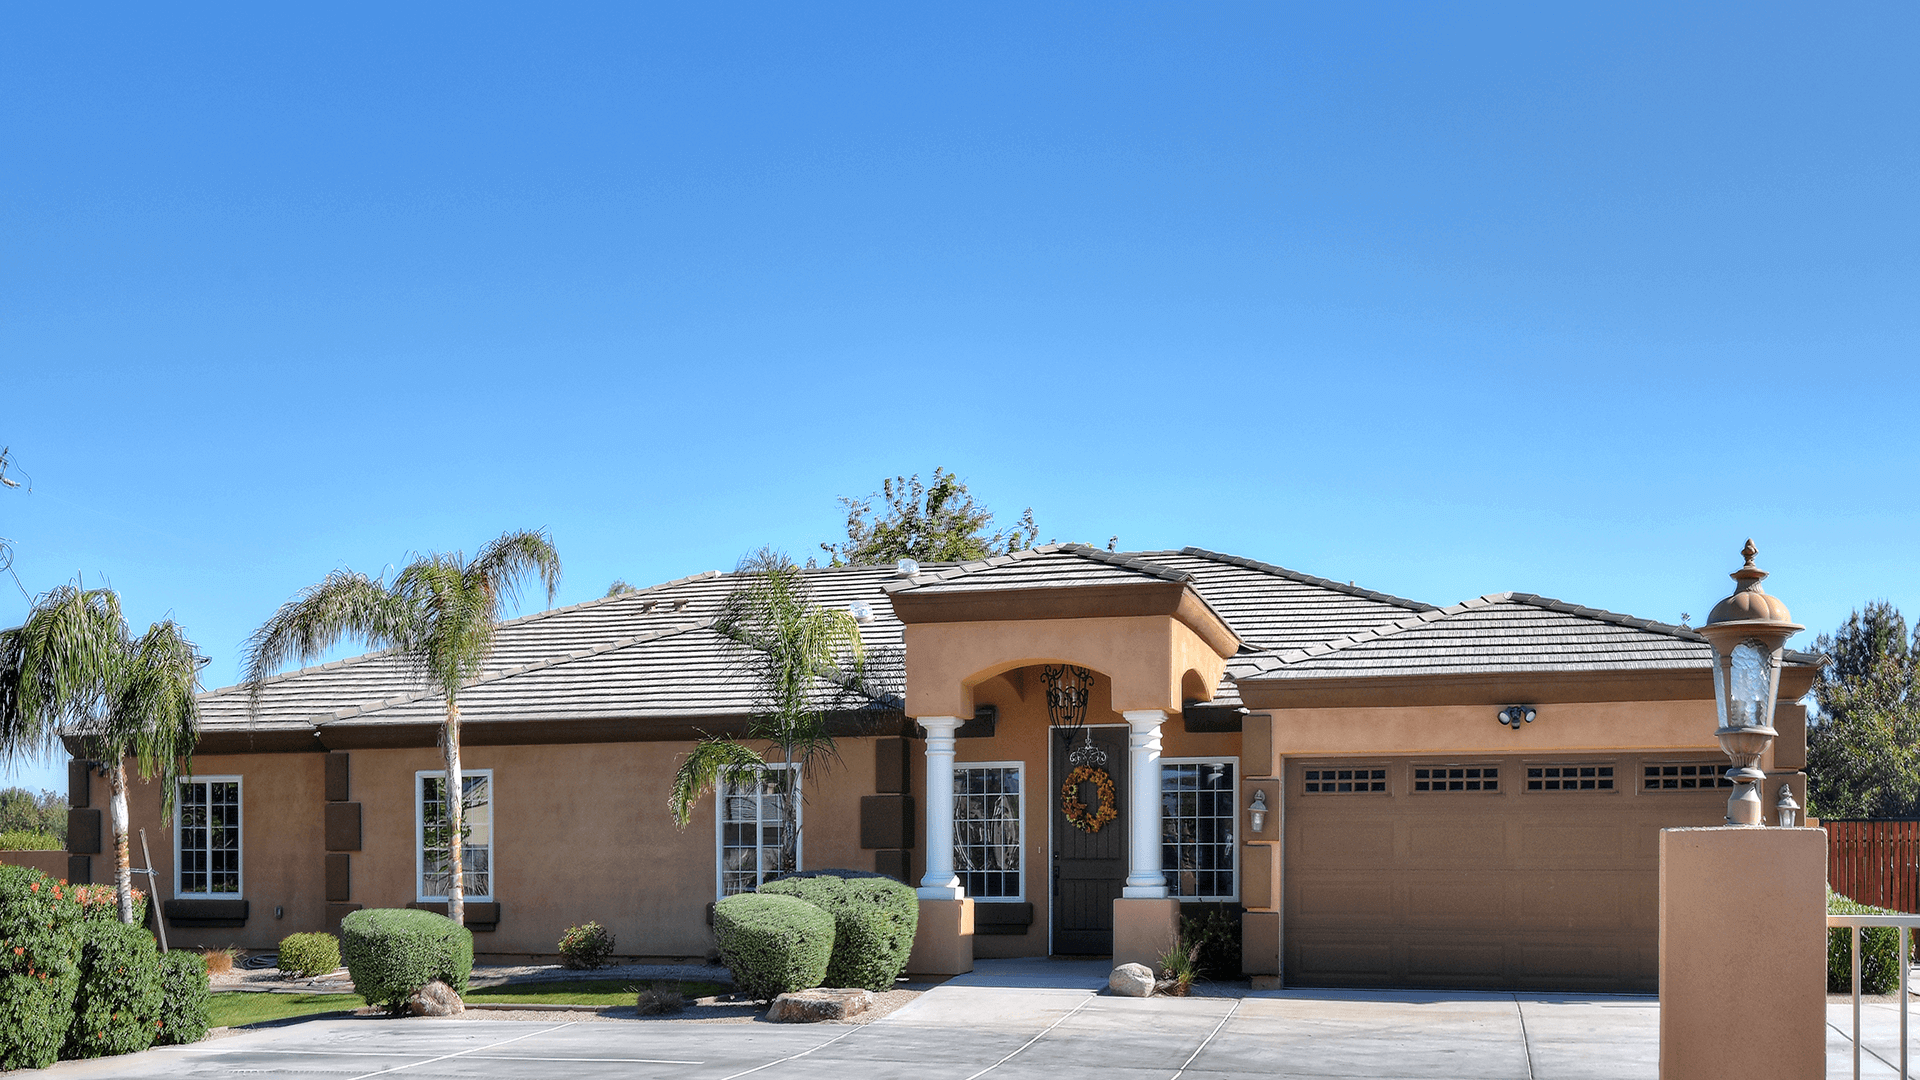 Eden Adult Care Facility home located in Gilbert Arizona, with locations in Mesa, Gilbert and the Phoenix East Valley